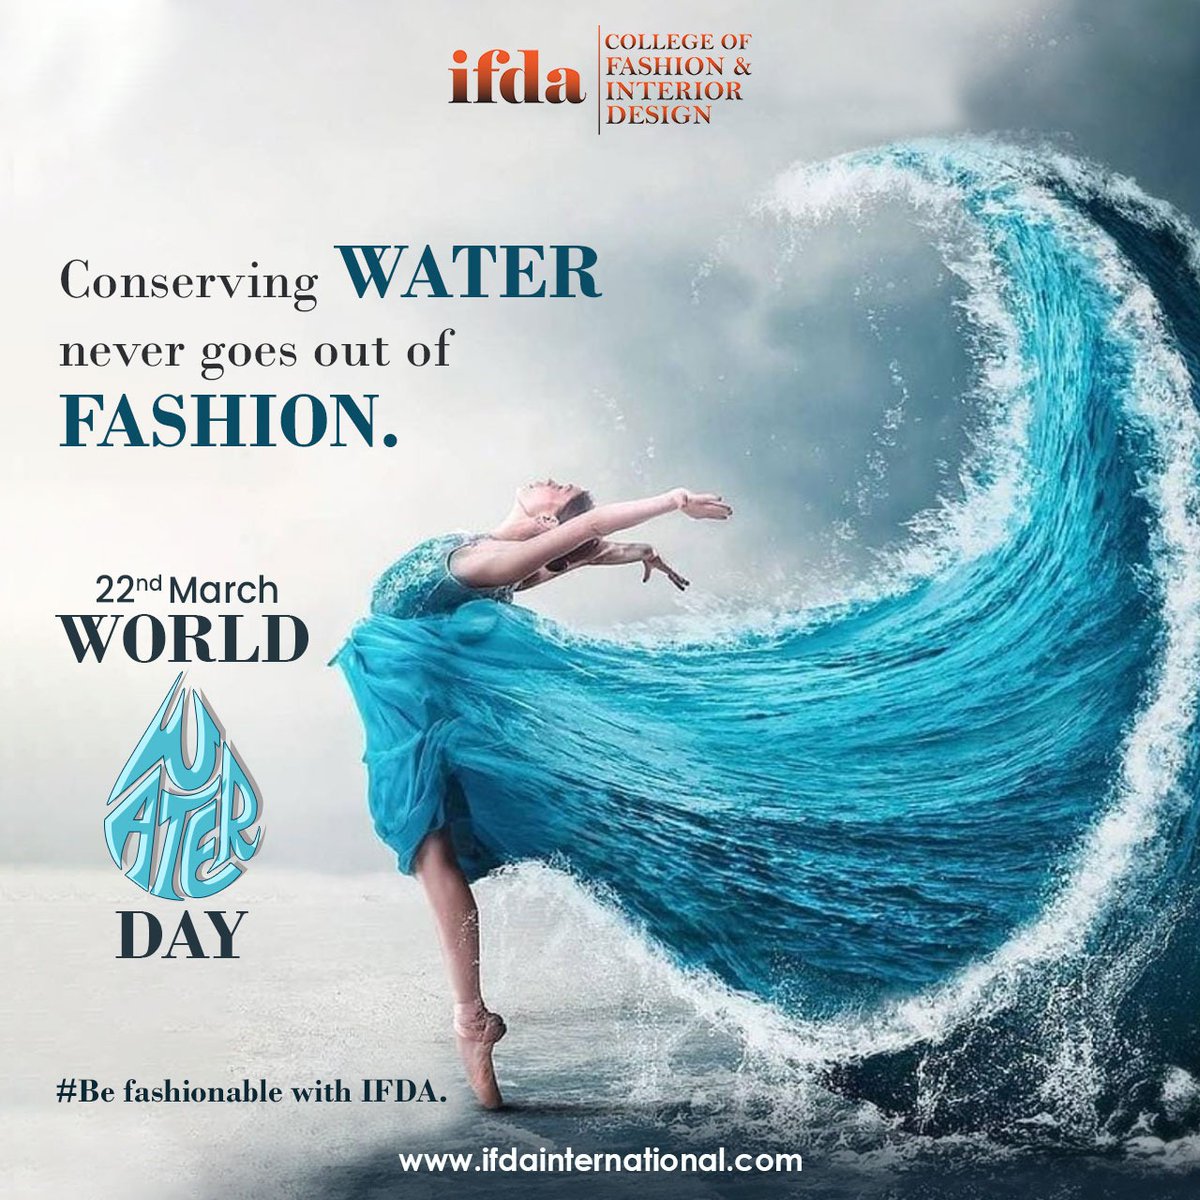 'Thank the universe that we have water on Earth. Preserve it. Let life continue 🌴🌍
#worldwaterday #water #all #savewater #wwdphc #cleanwater #waterday #climatechange #health #leavingnoonebehind #environment #drinkingwater #bethechange #sustainability #ecosystems #bhfyp